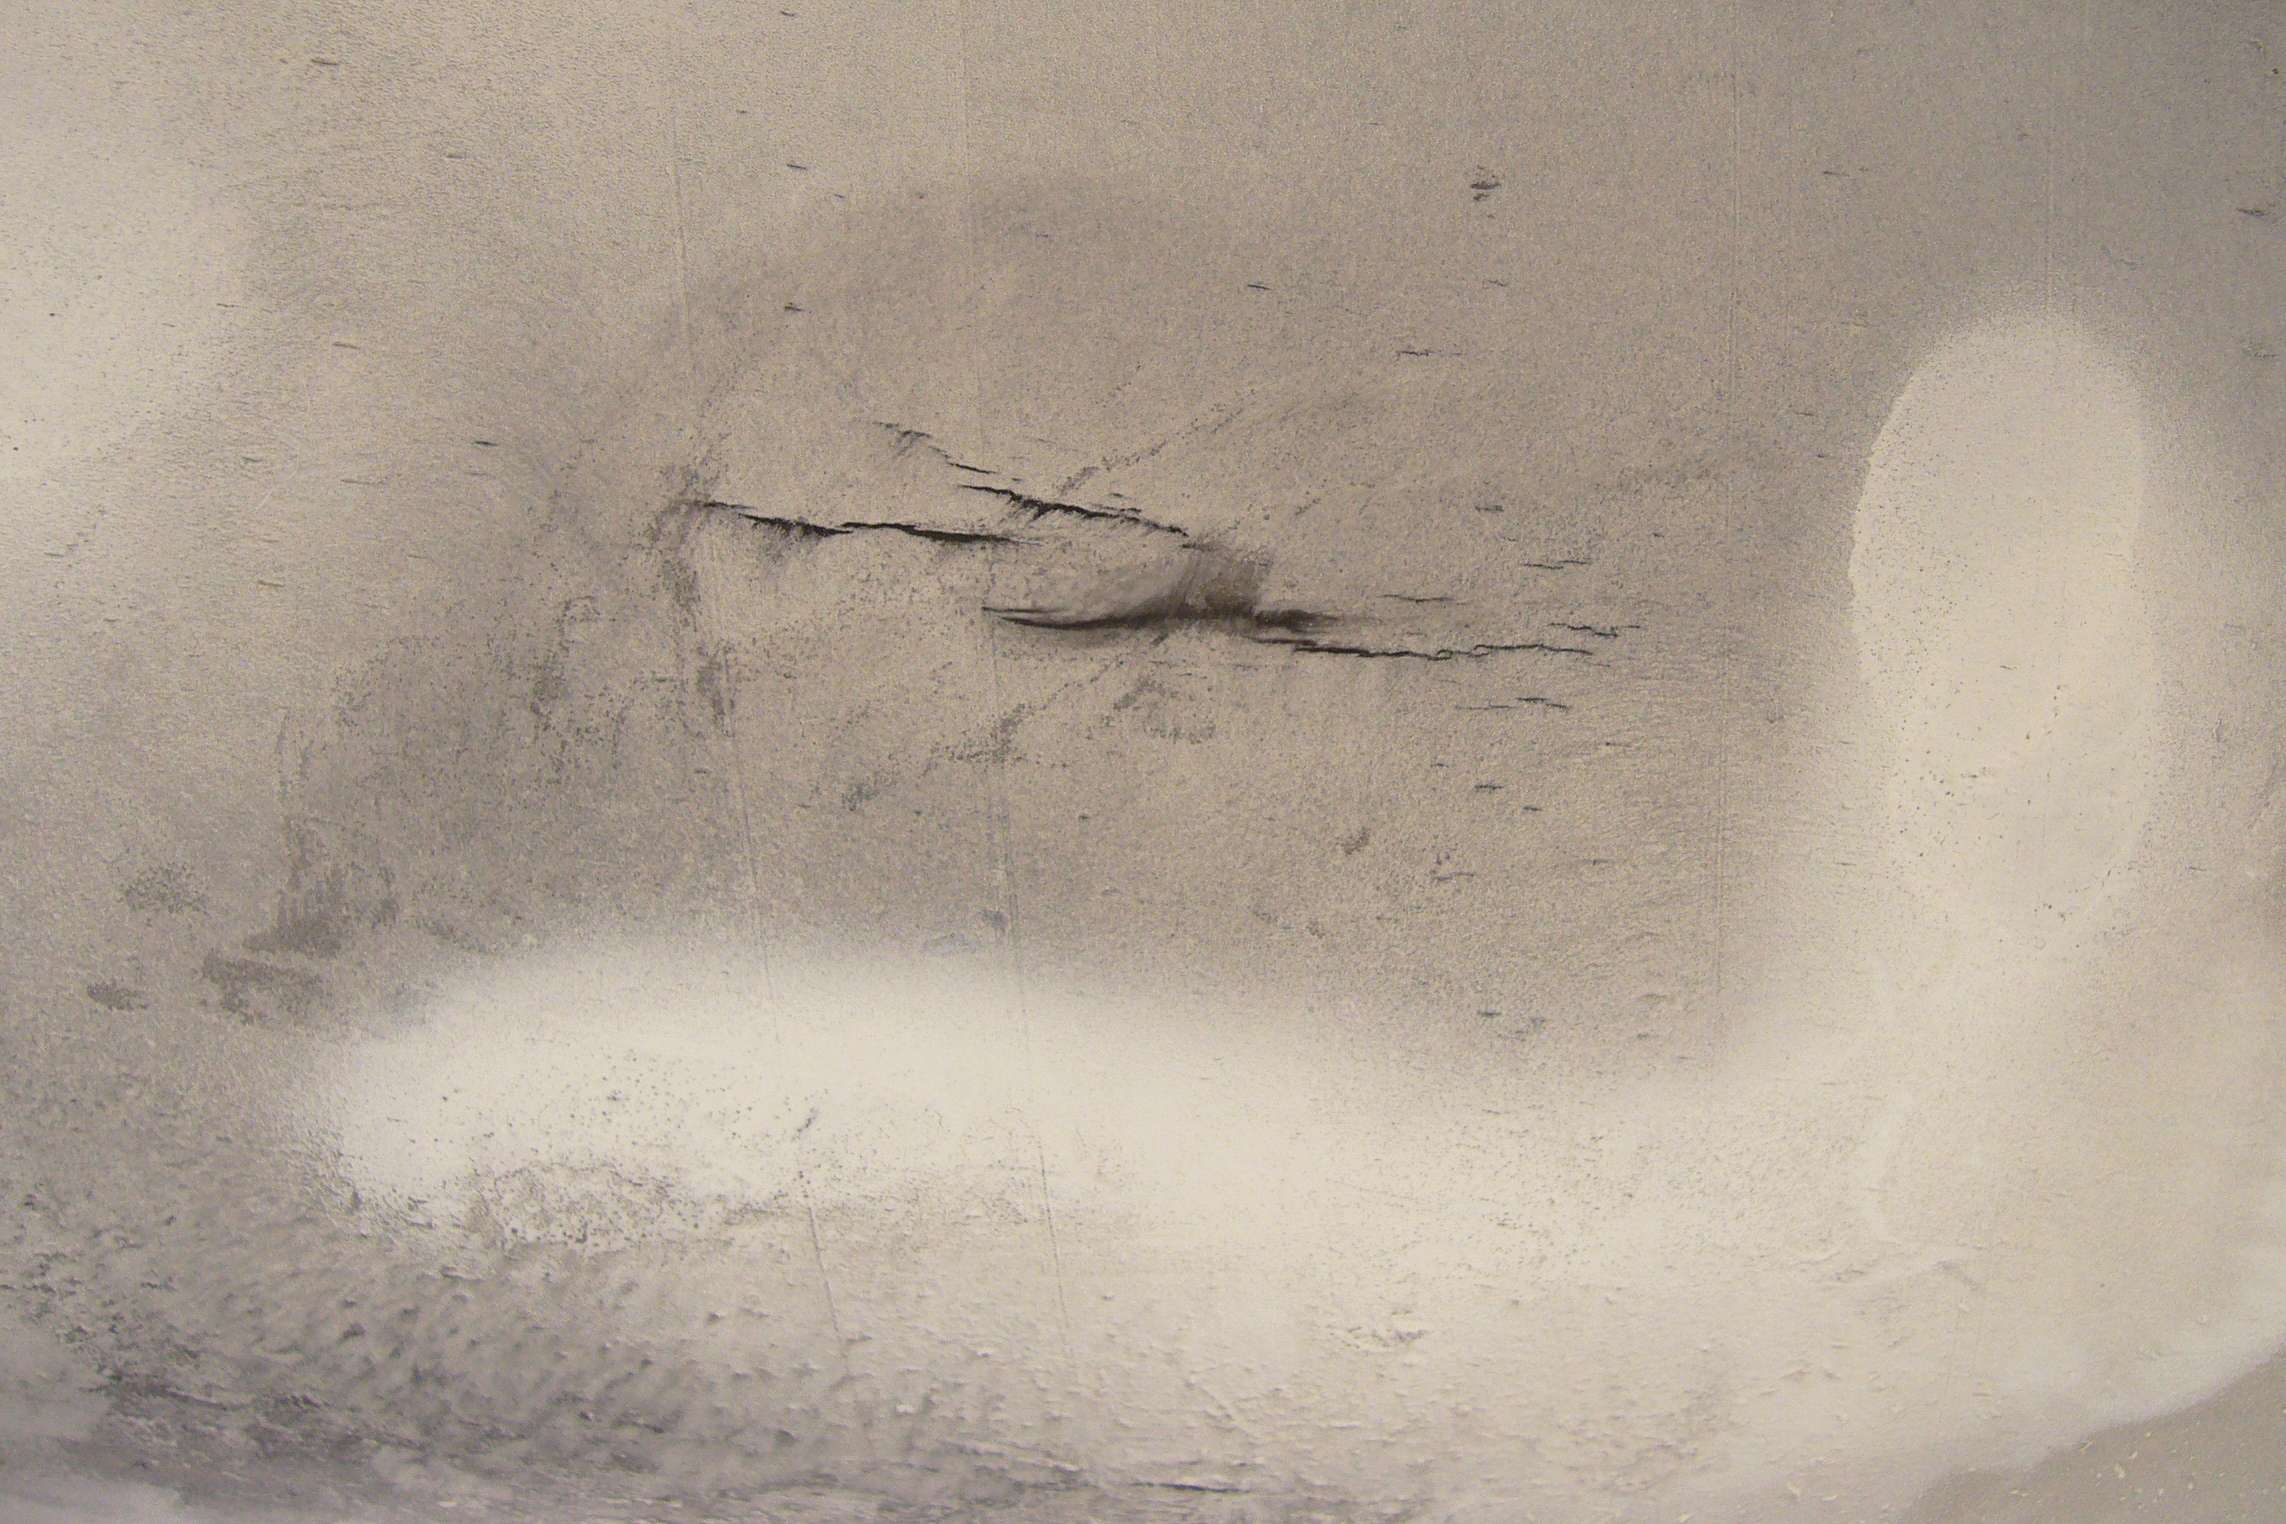 Image of a crack in a pipeline wall.